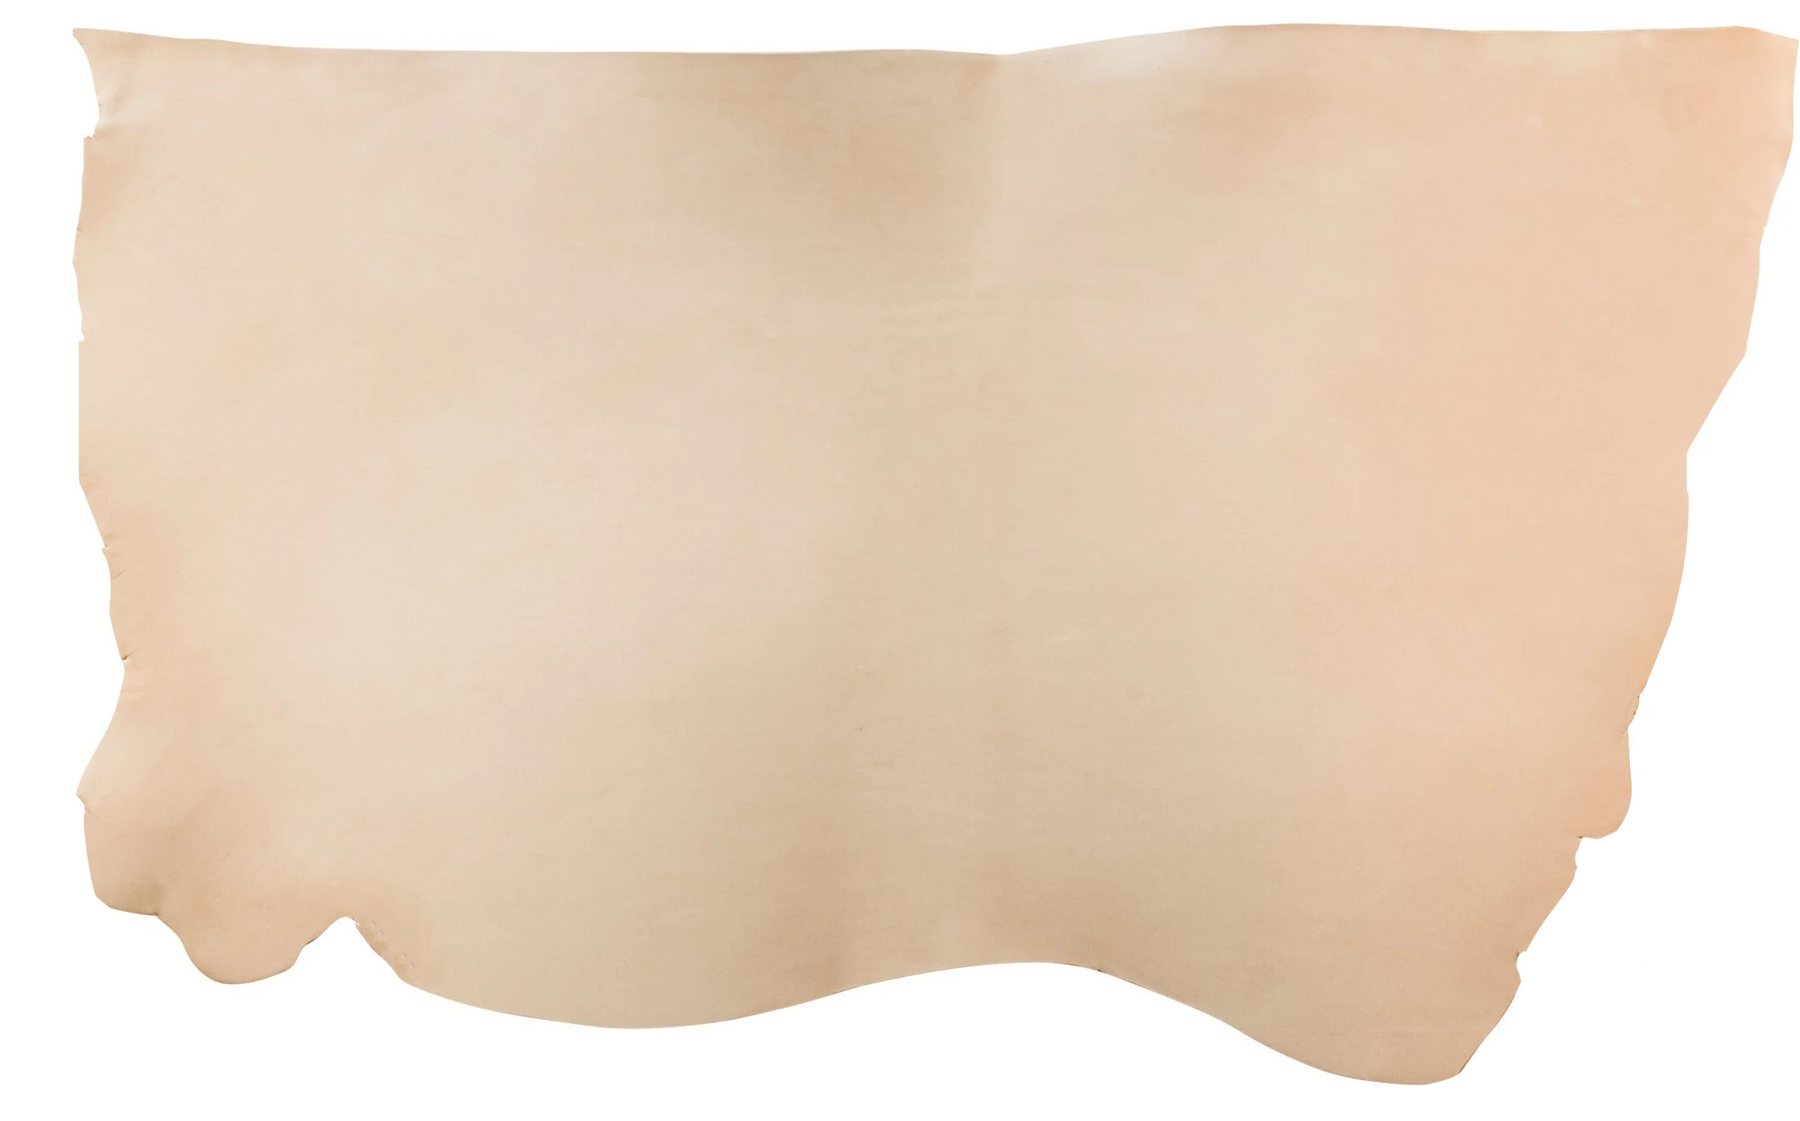 Vegetable Tanned Cowhide Leather For Crafting